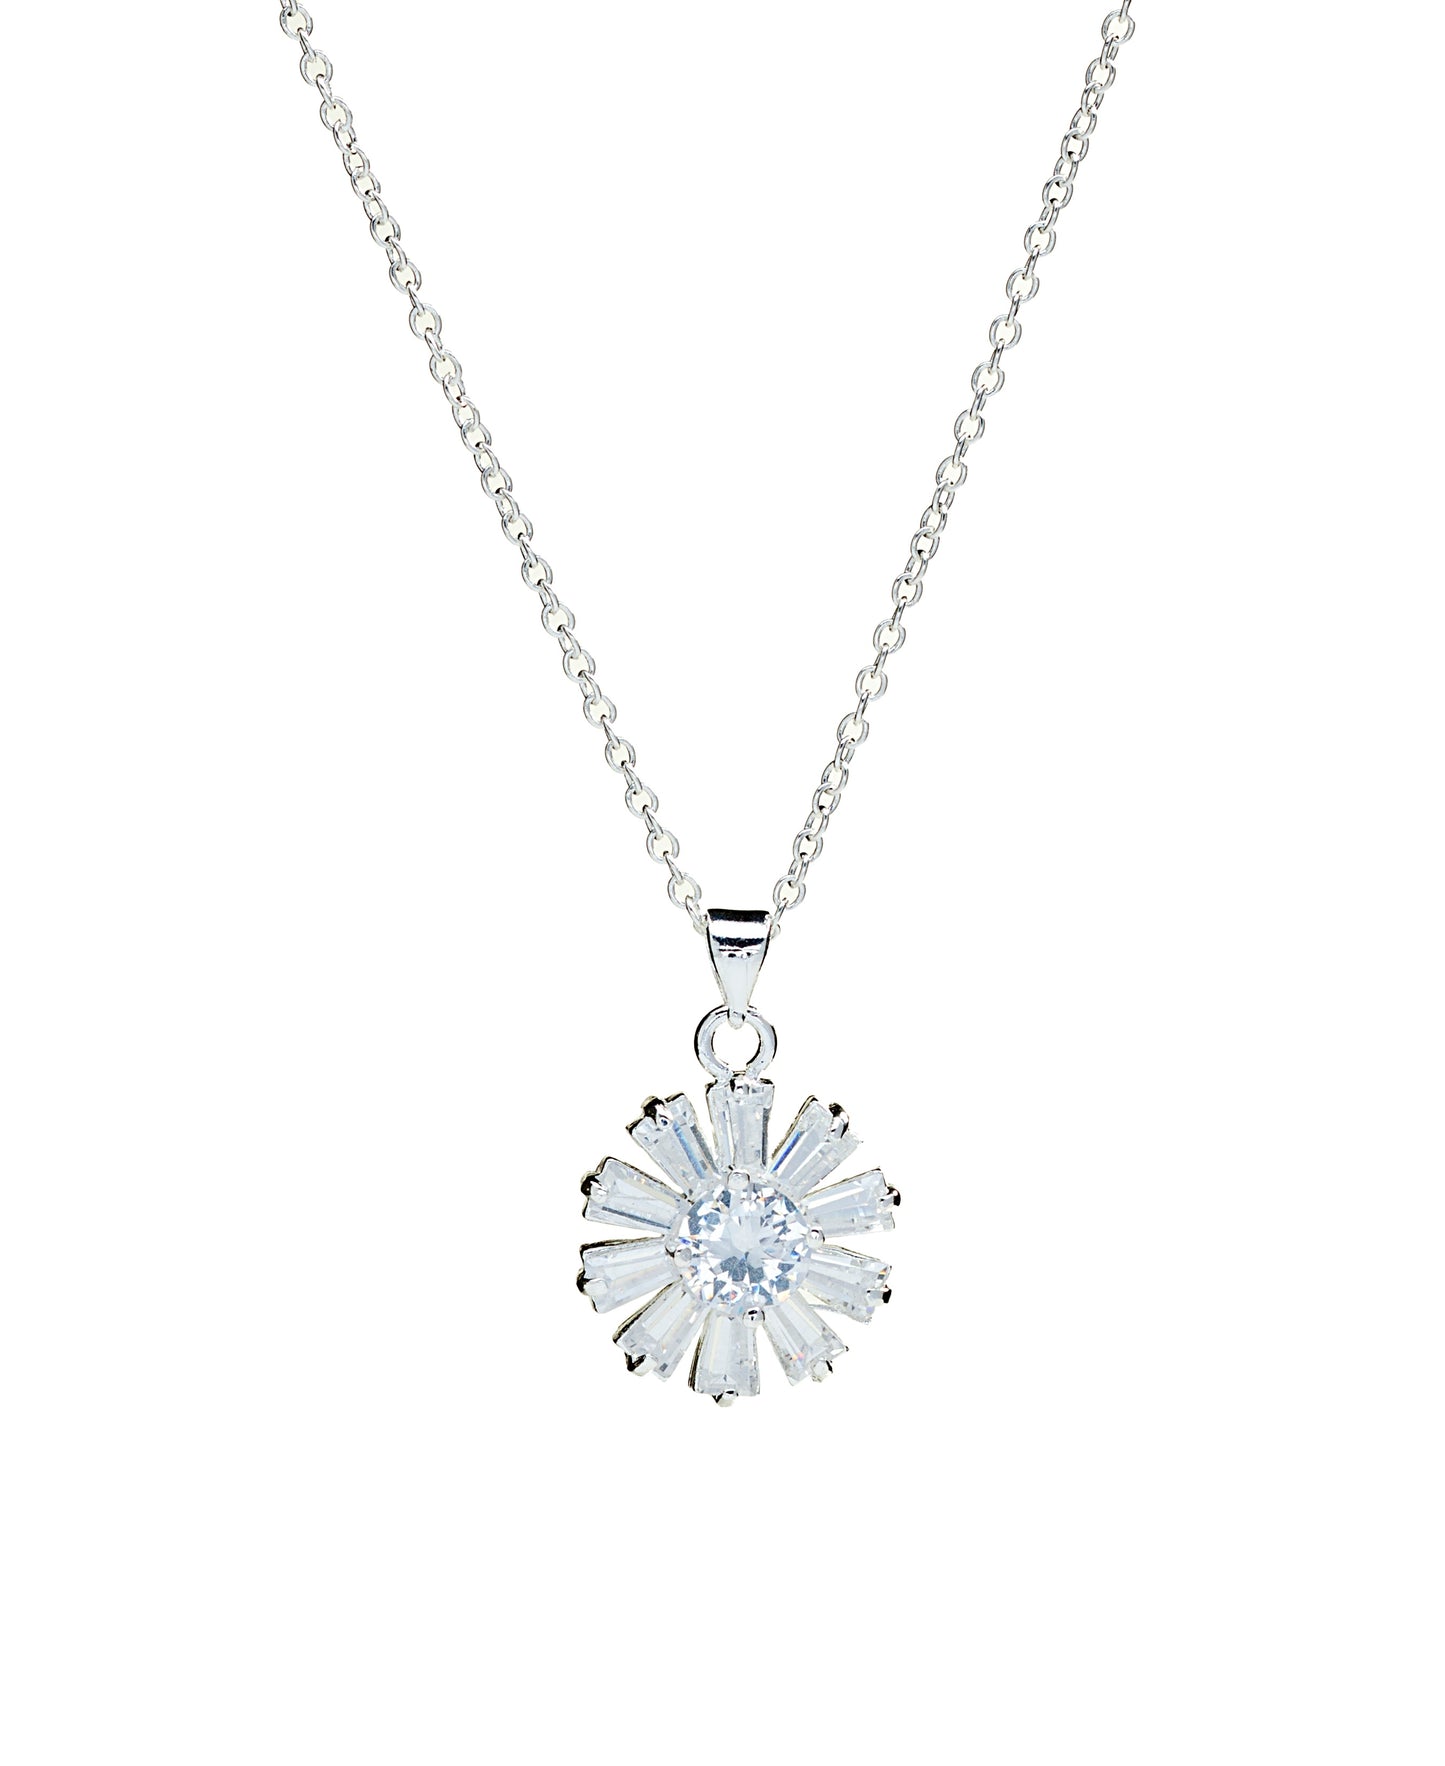 Cubic Zirconia Flower Sterling Silver Pendant Necklace